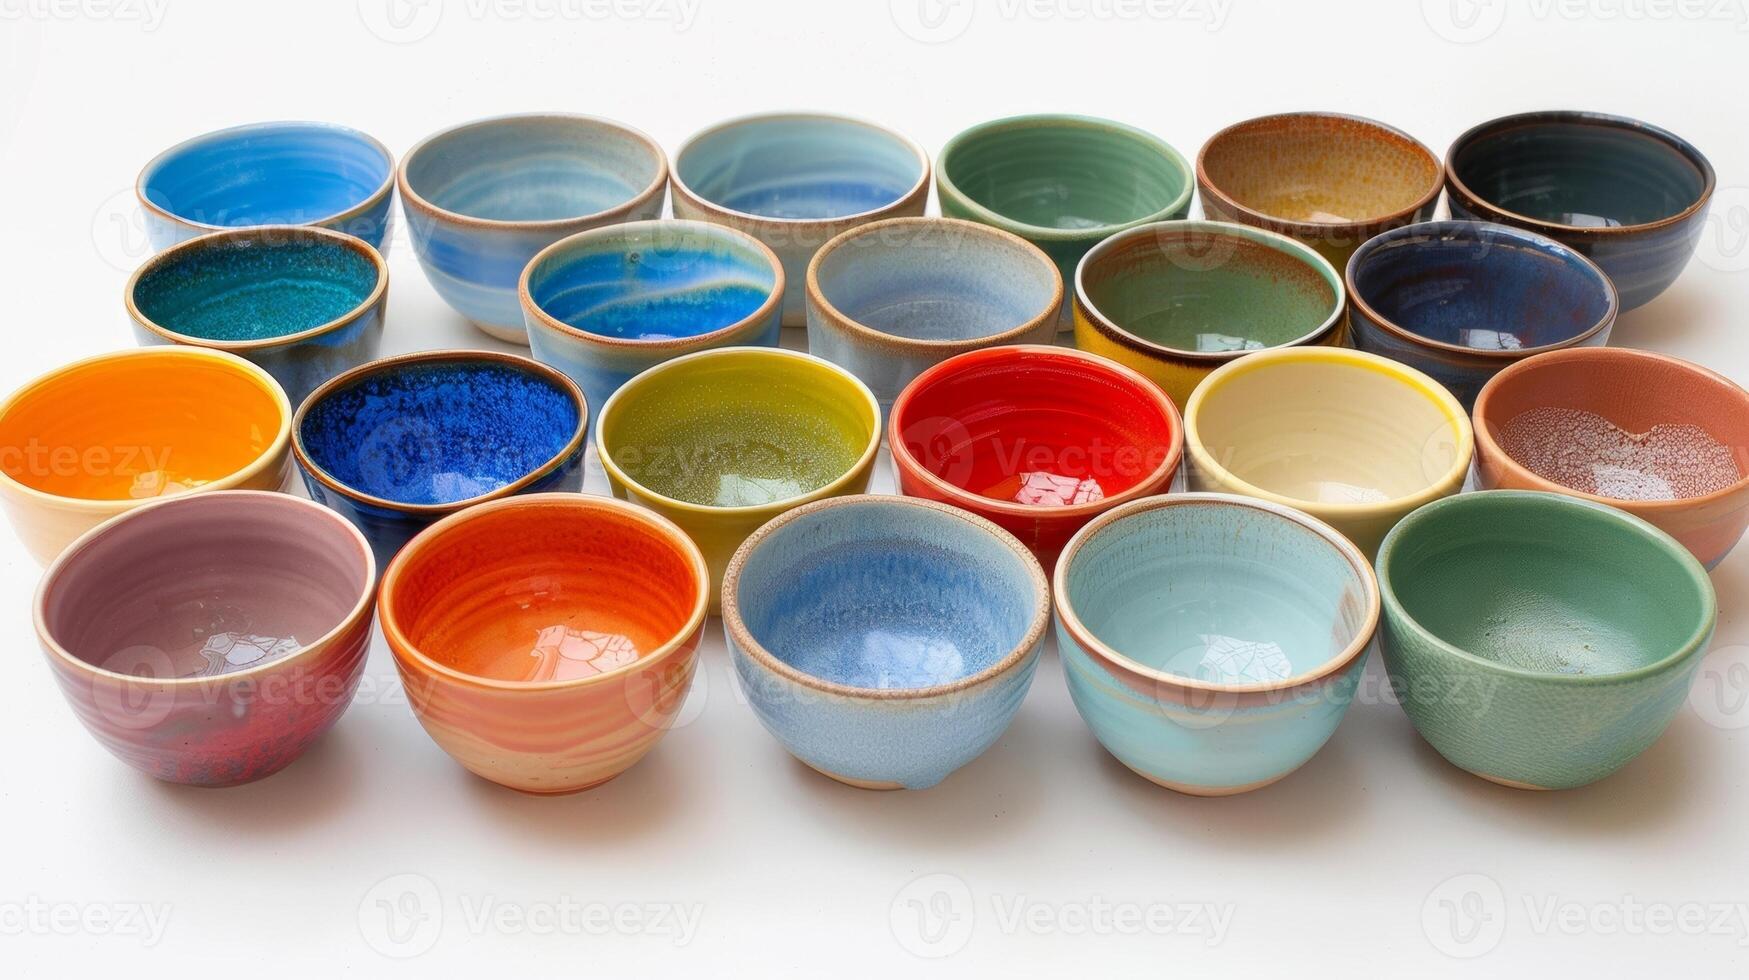 A set of glazed ceramic bowls arranged in a gradient of colors from light to dark demonstrating a potters understanding of color theory and their ability to mix and layer glazes for photo